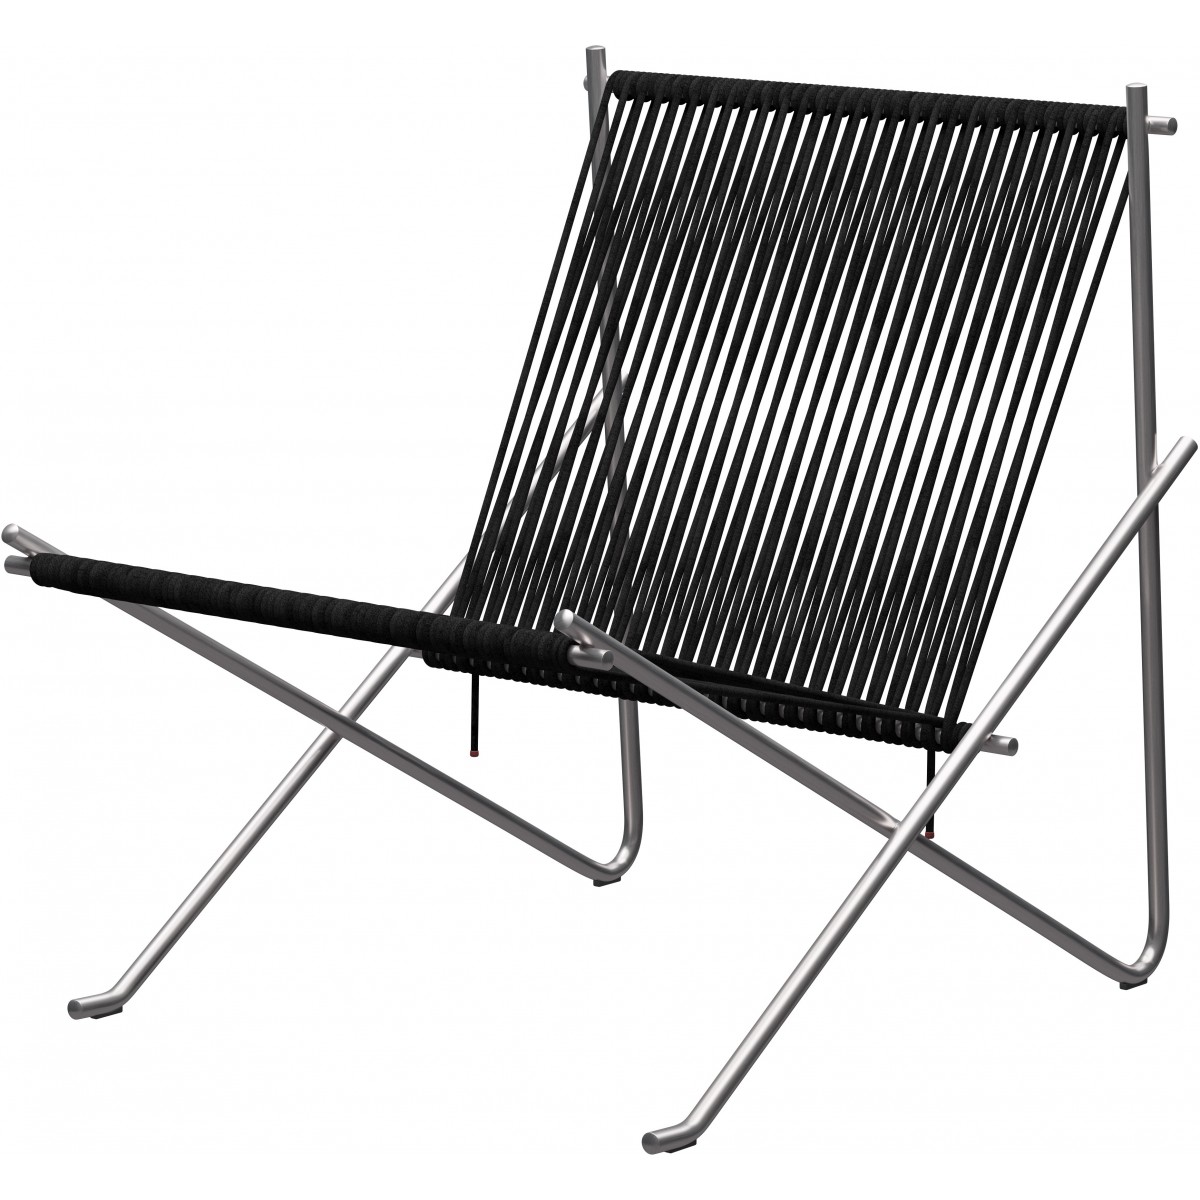 PK4 Lounge chair – Black steel + stainless Brushed